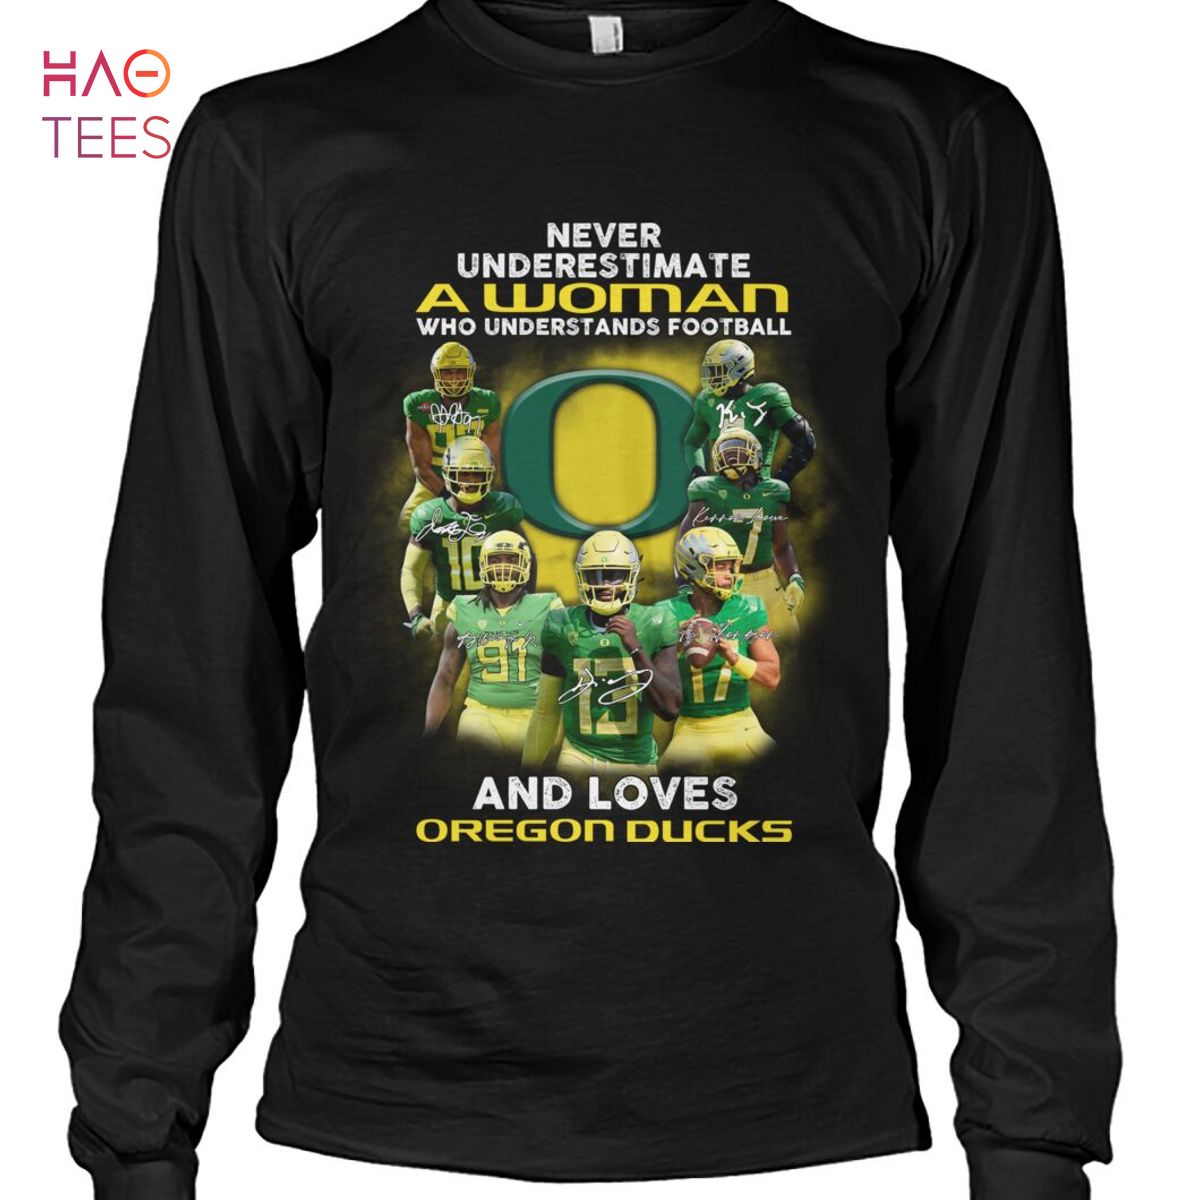 Never Underestimate A Woman Who Understands Football And Loves Oregon Ducks T Shirt Unisex T Shirt